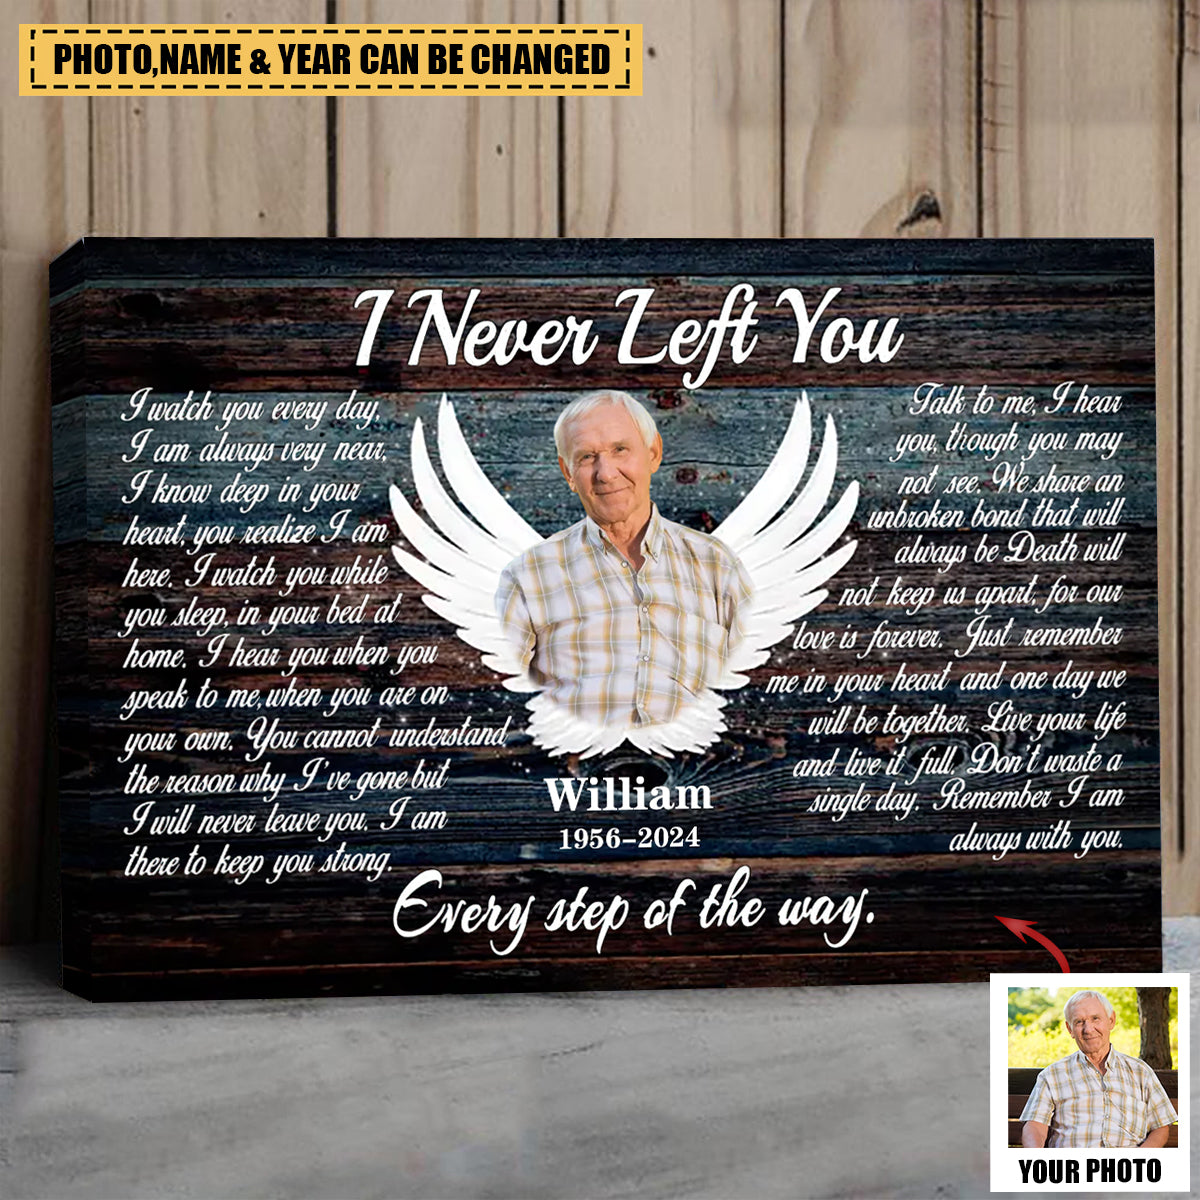 Angel Wings I Never Left You Personalized Canvas Wall Art